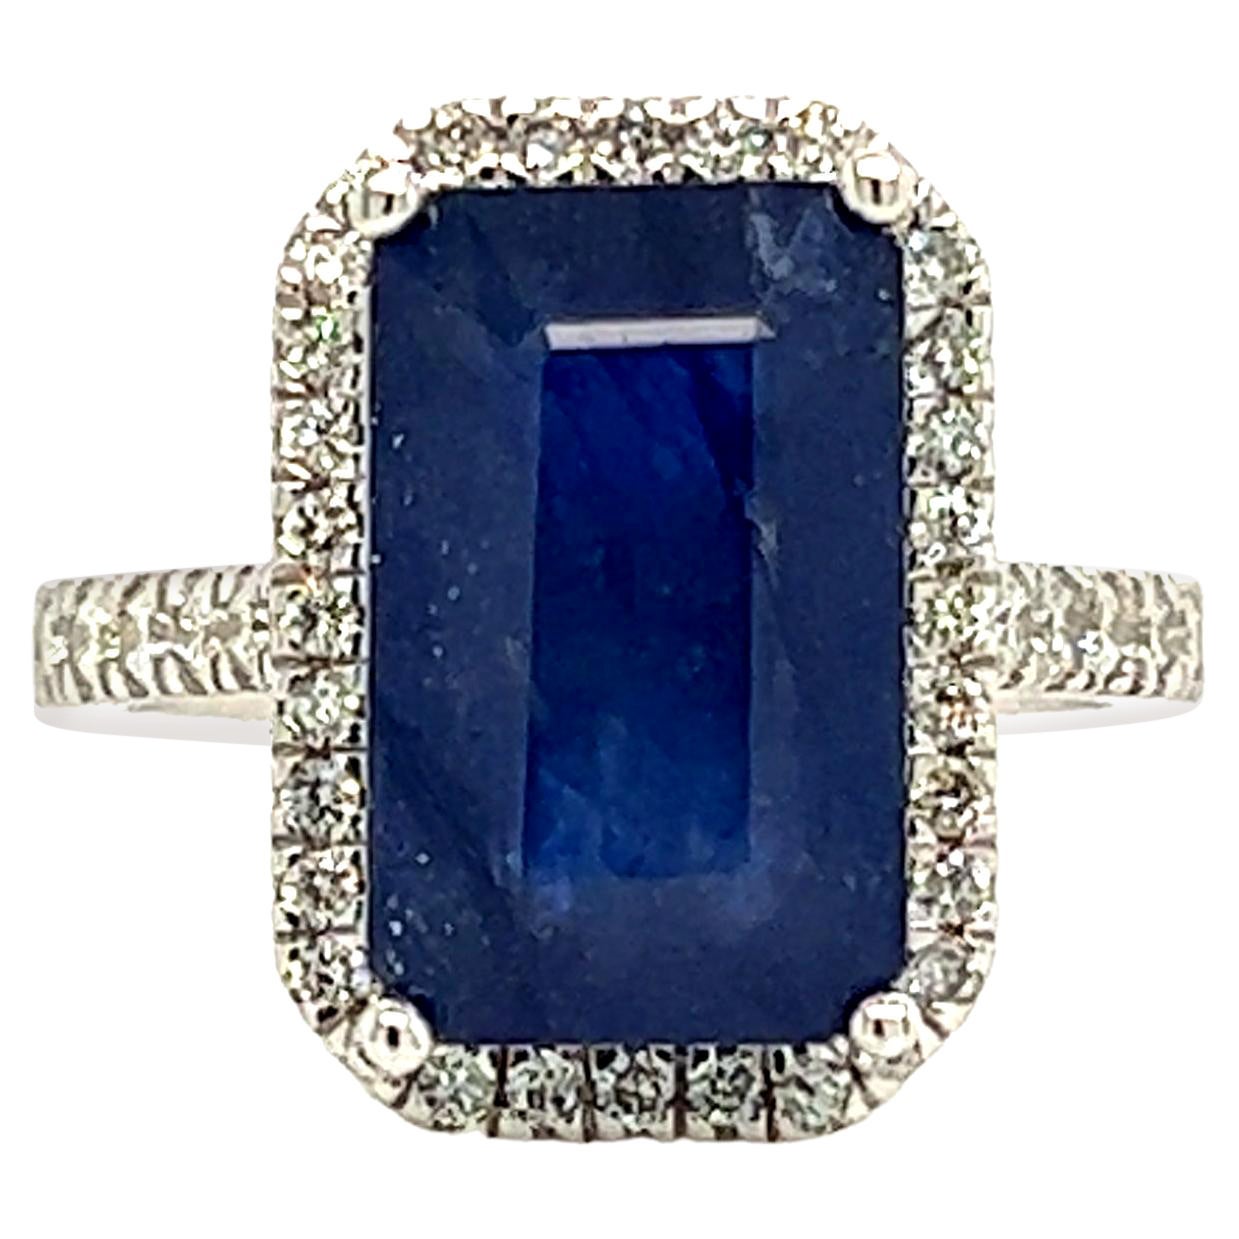 Sapphire Diamond Ring Size 6.25 14k Gold 6.84 TCW Certified For Sale